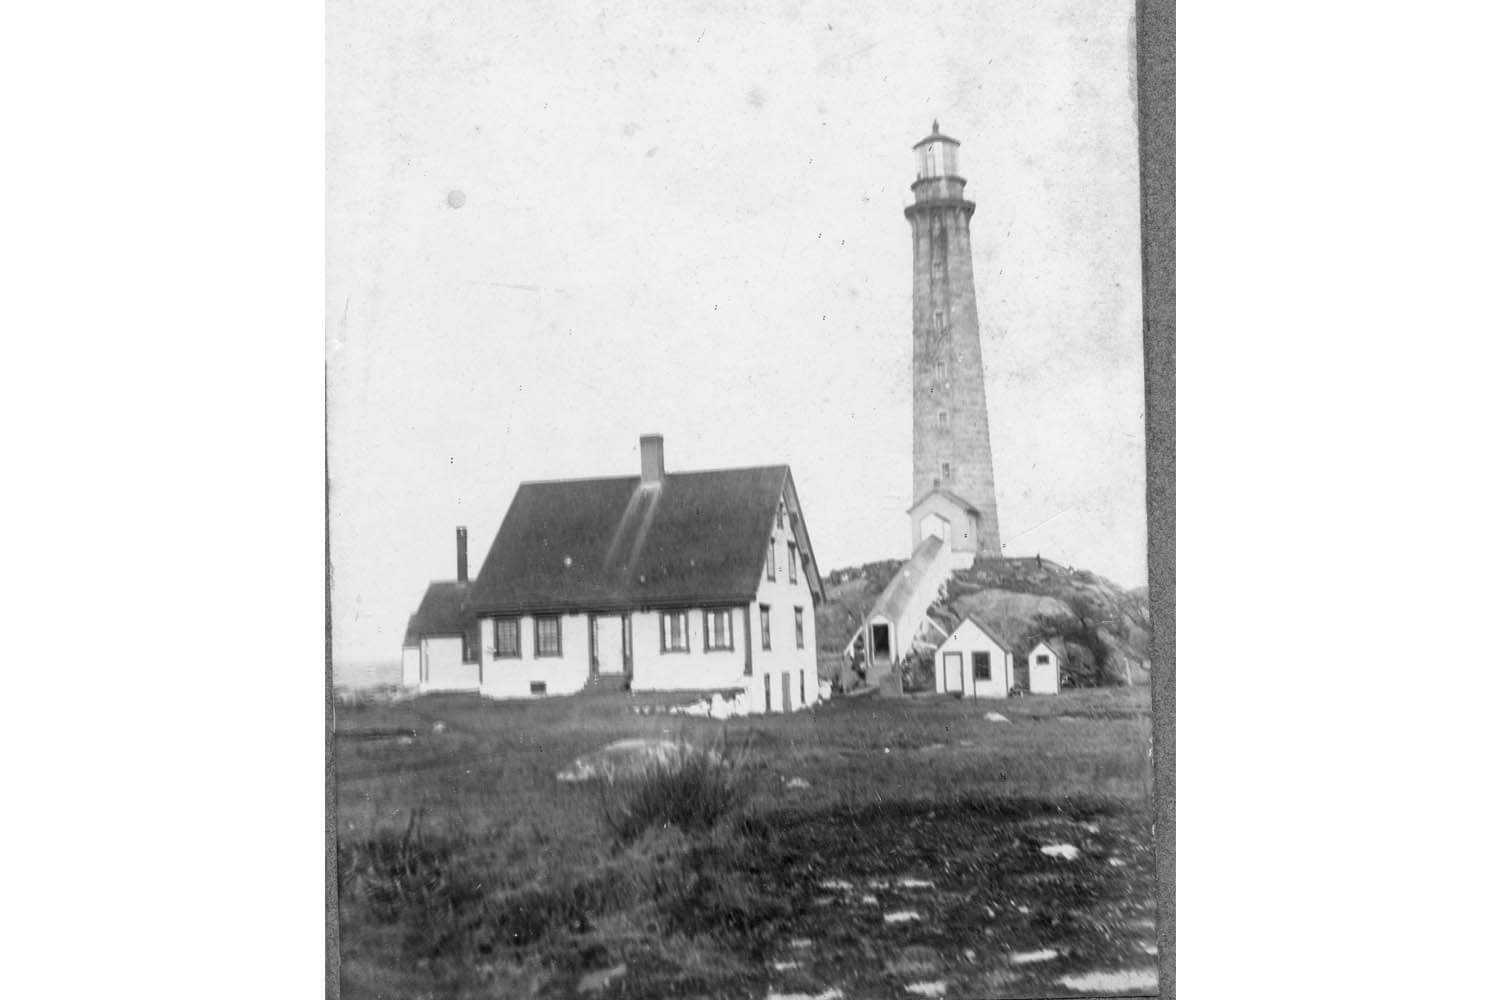 North tower with covered walkway c.1910.